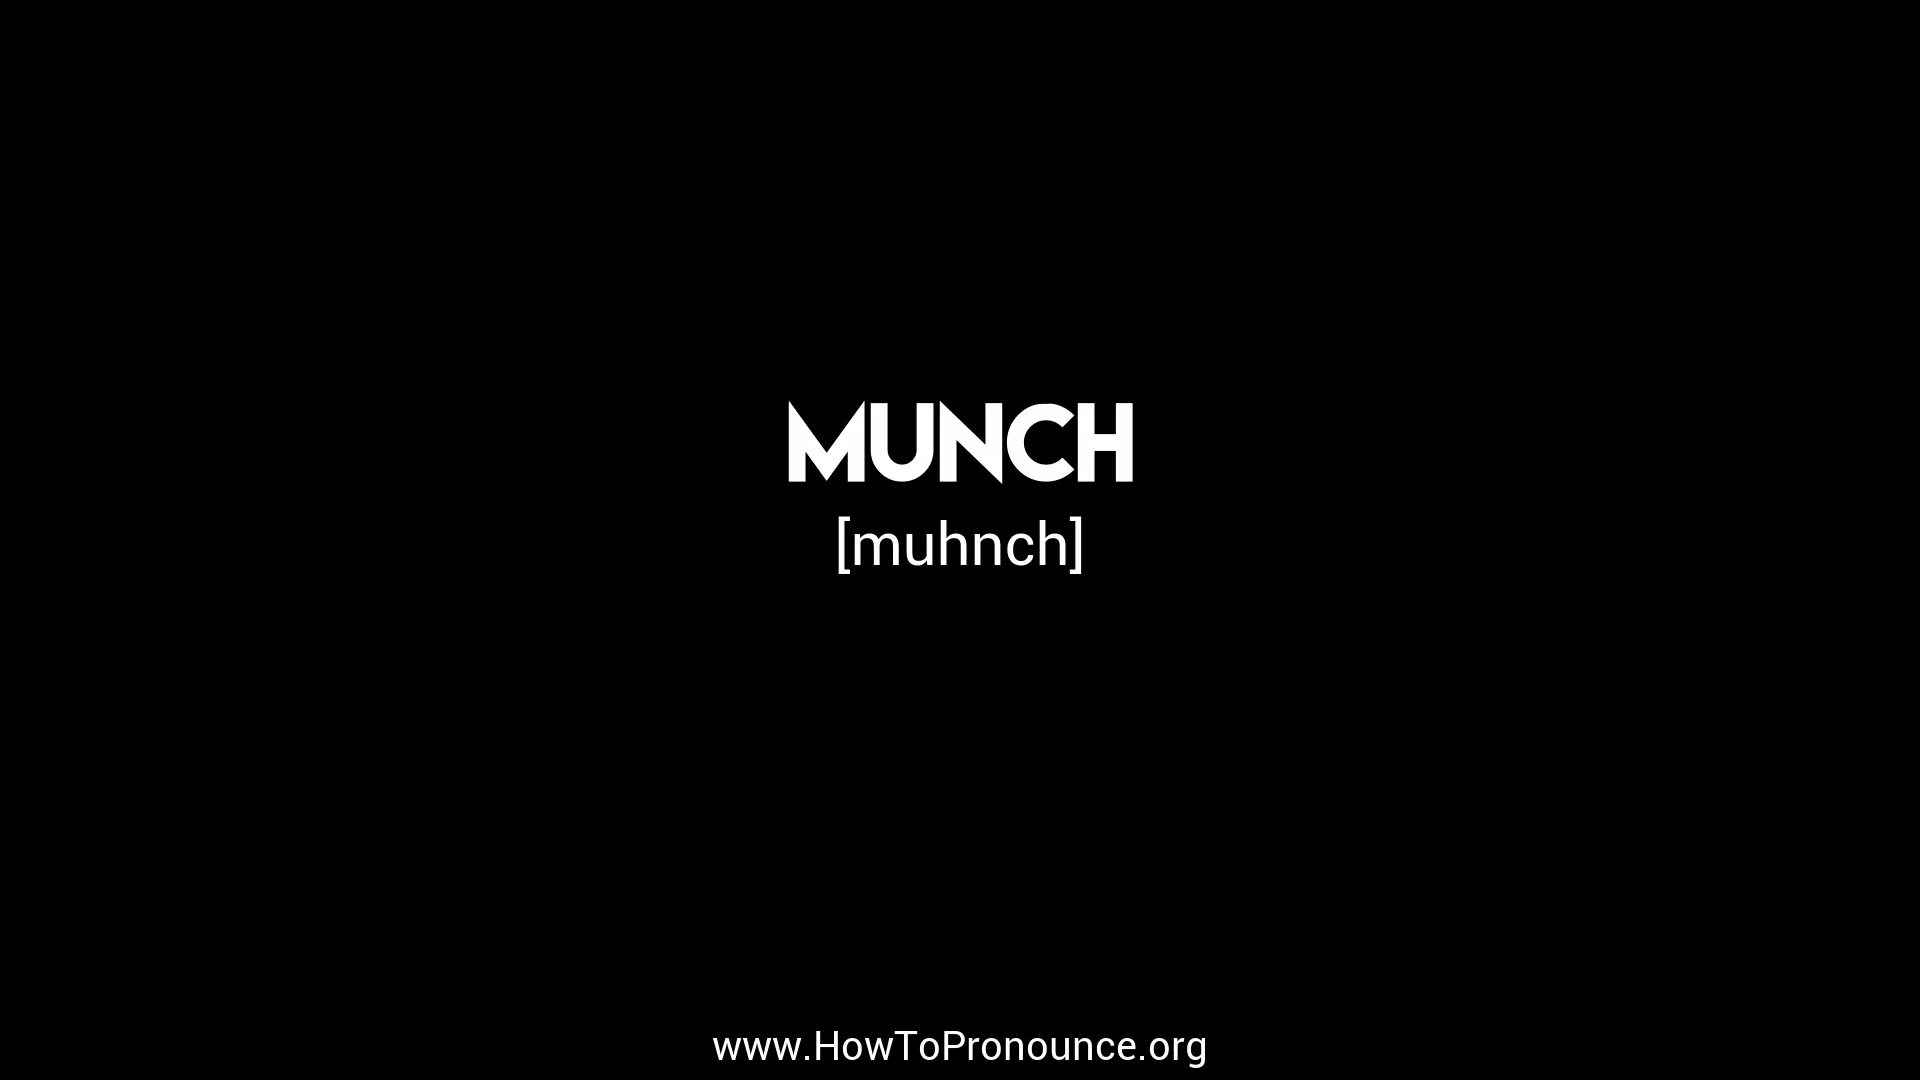 Munch Meaning, Pronunciation, Numerology and More